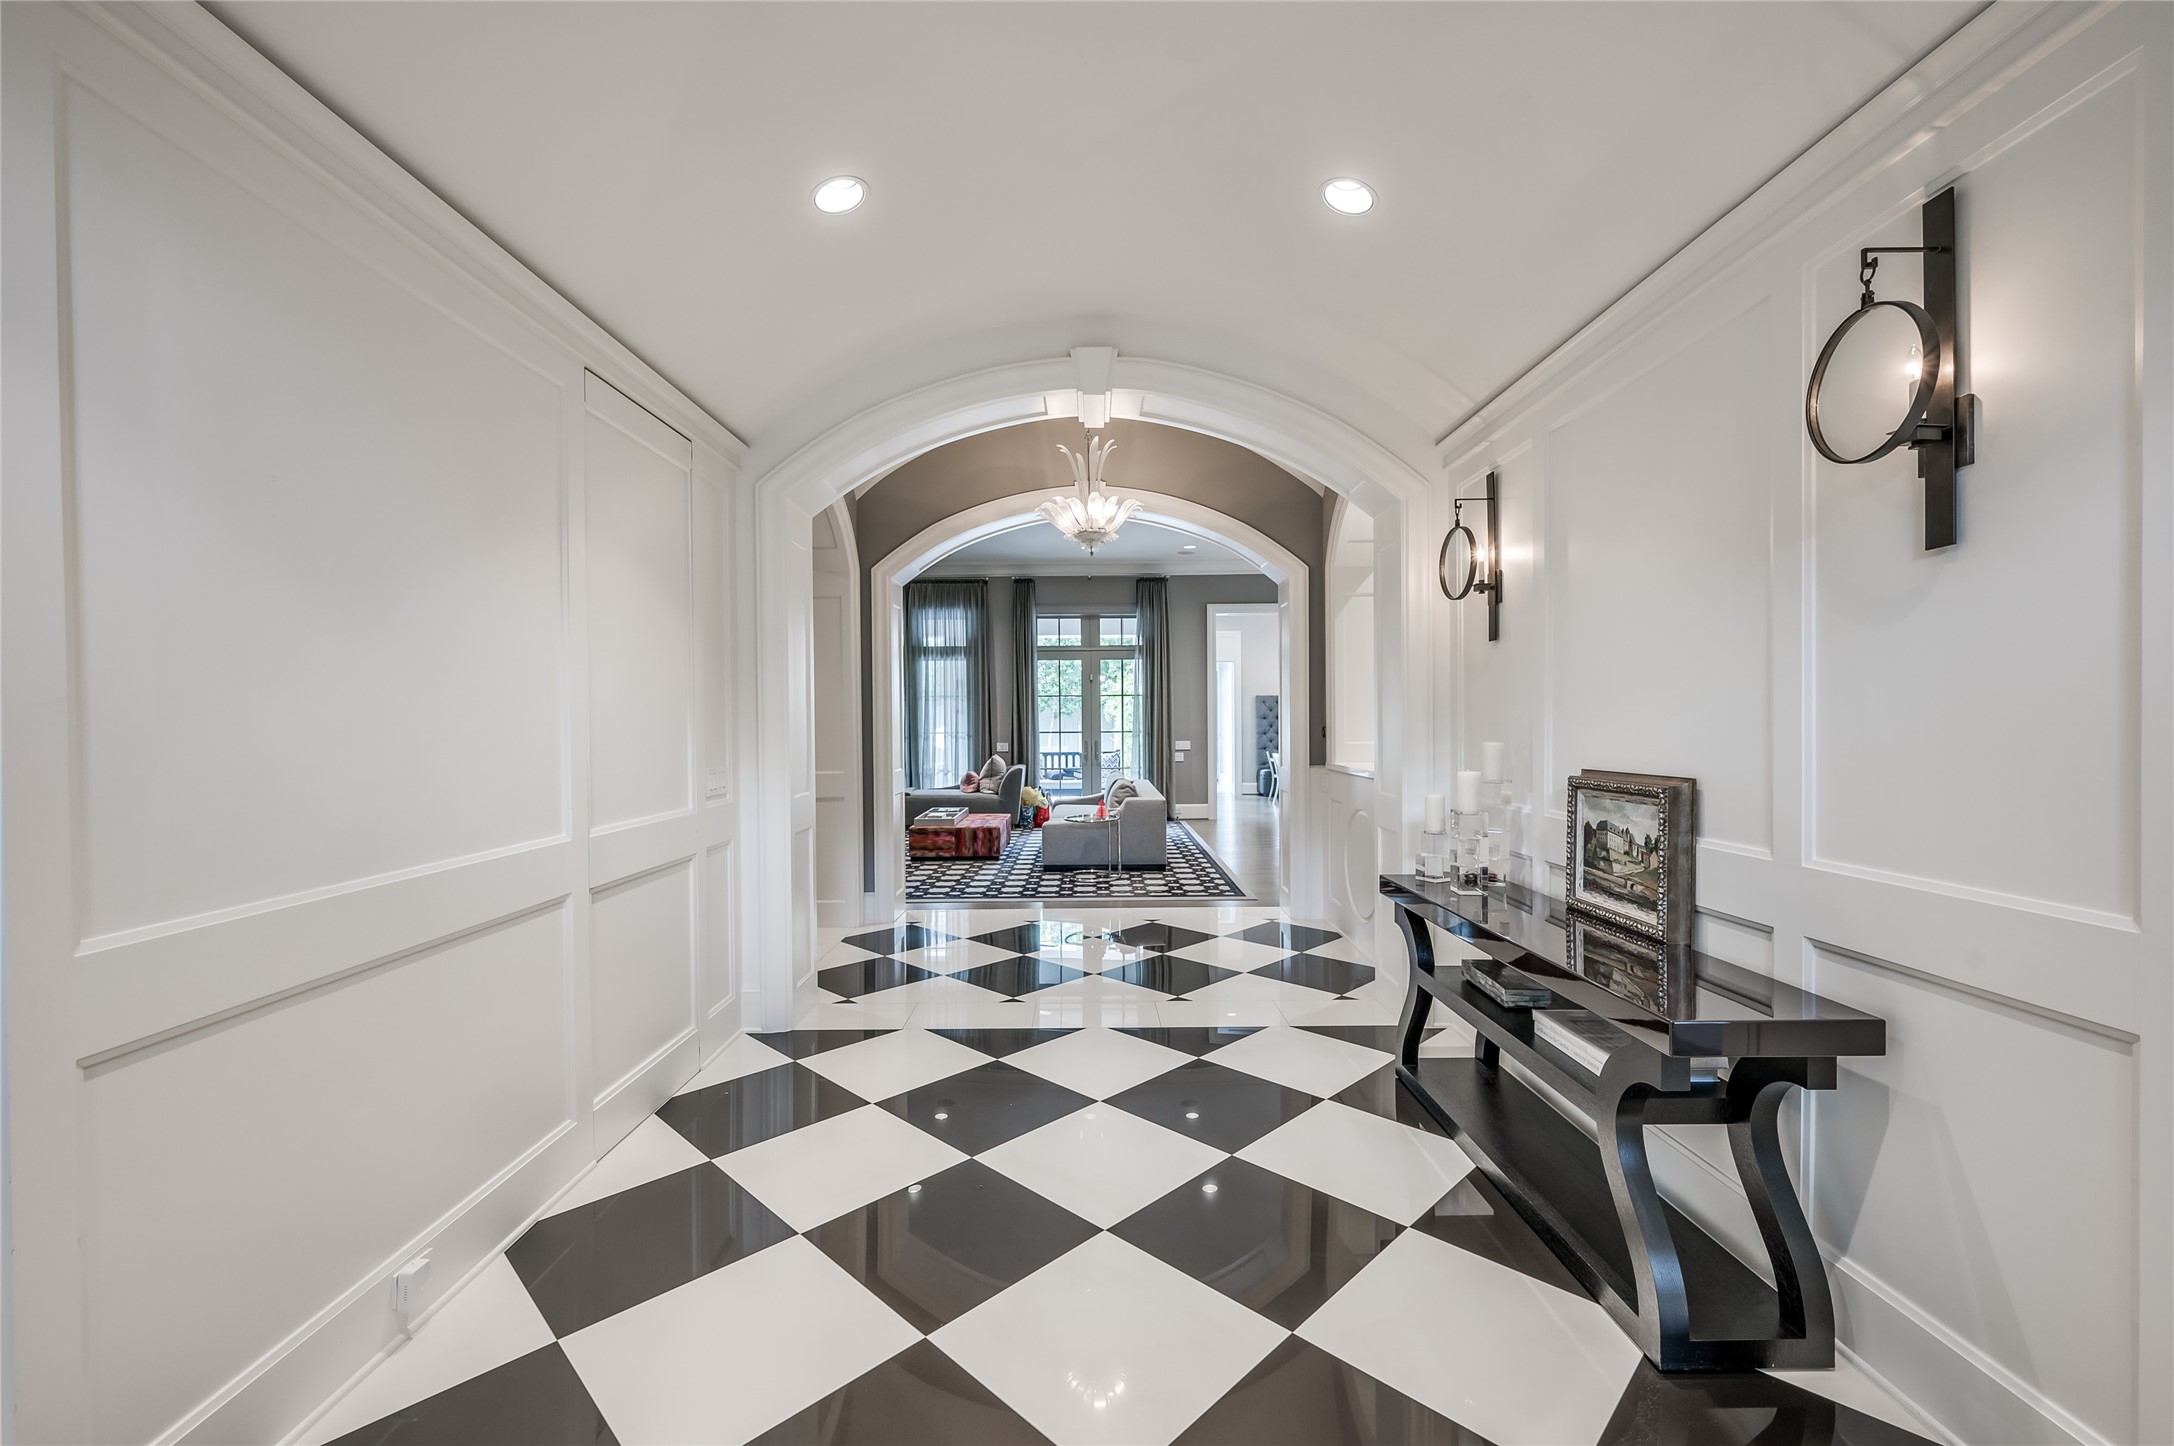 [Foyer / Center Hall]
Beneath a barrel ceiling, paneled walls line the center hall that travels from the foyer to a cross gallery and family room at rear.